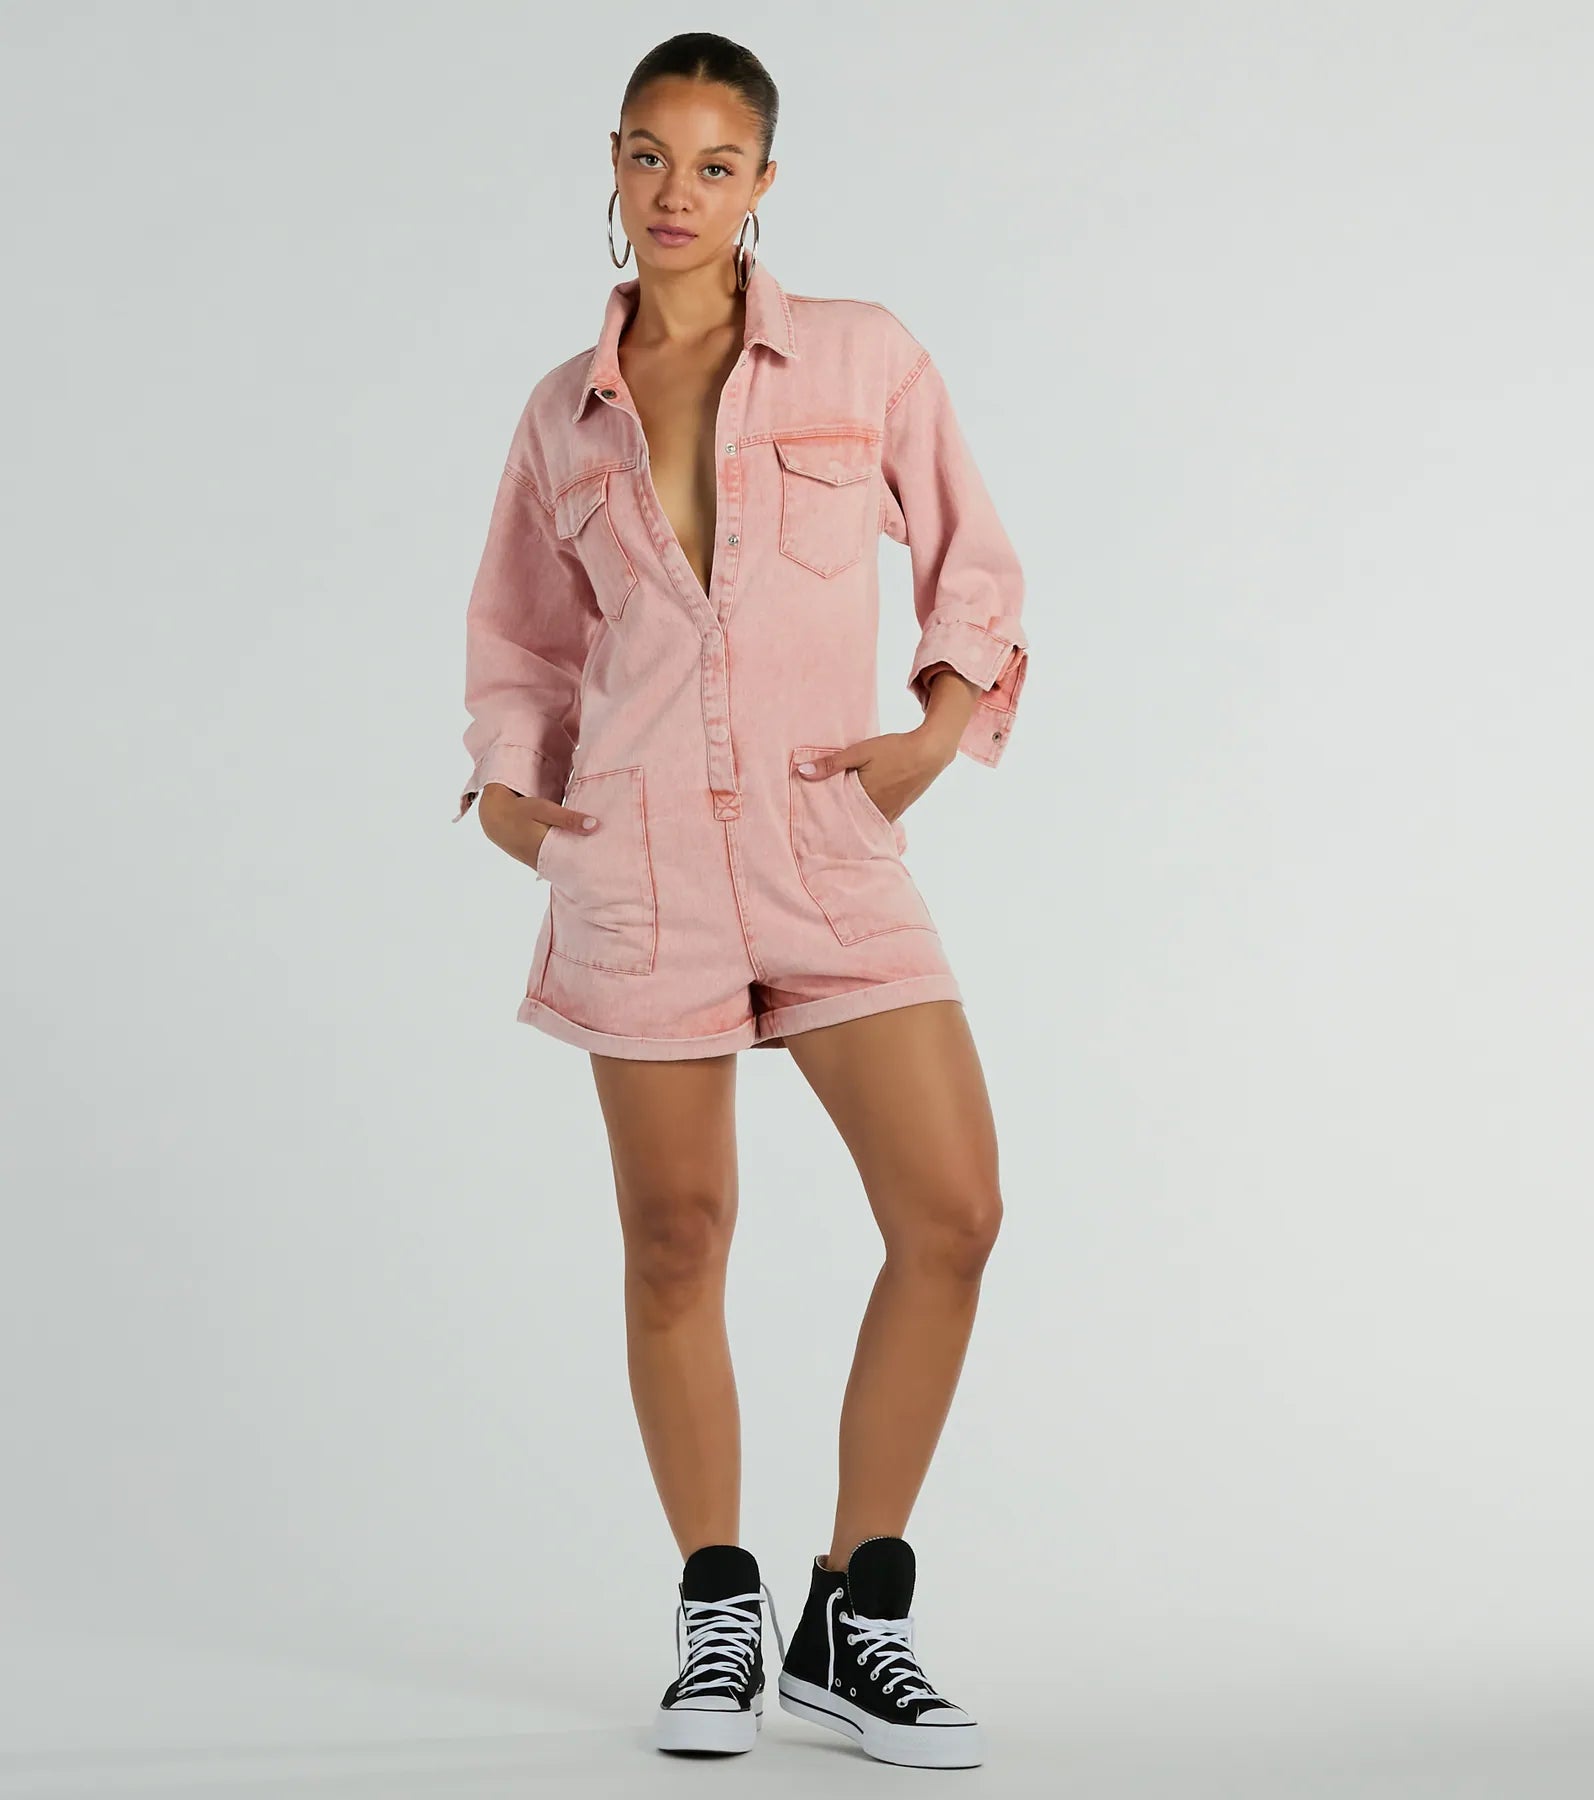 Denim Long Sleeves Button Front Pocketed Collared Romper